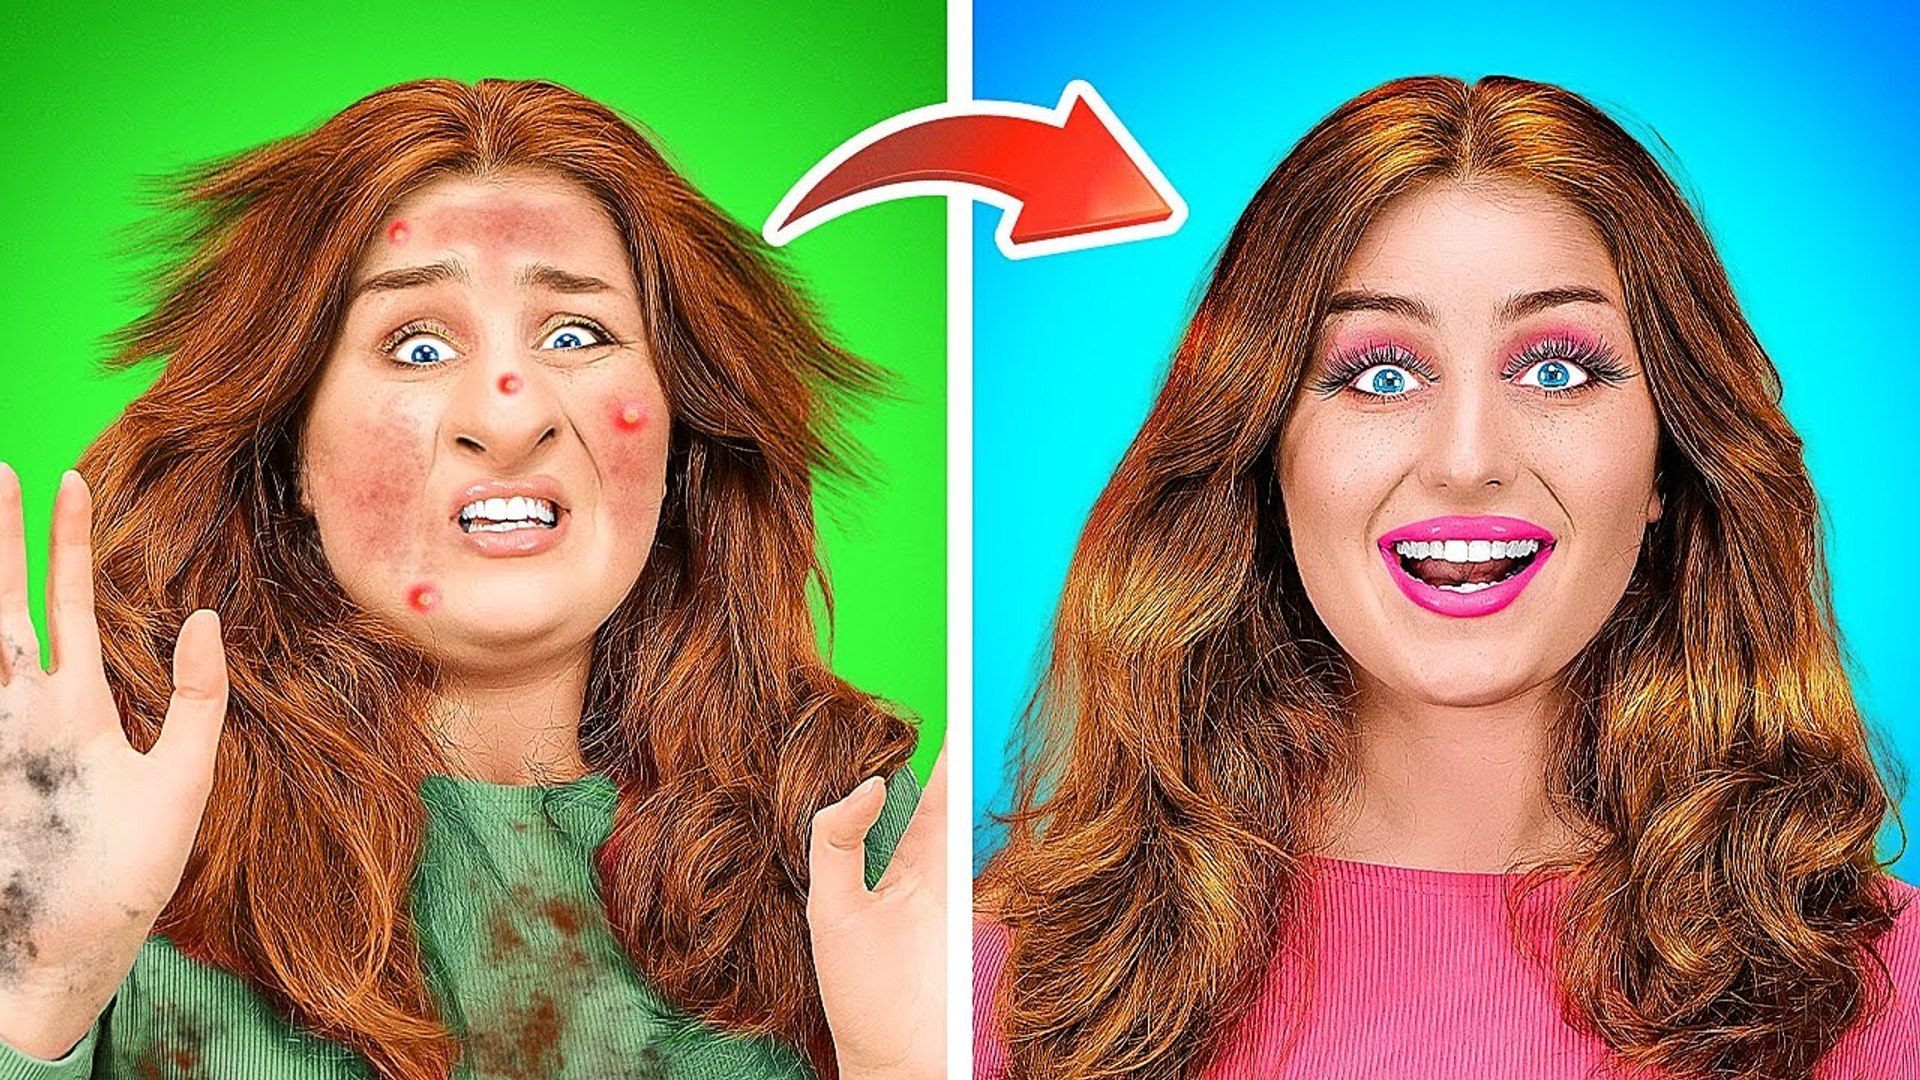 WOW MAKEUP TRANSFORMATIONS TUTORIAL Incredible SFX Makeup Hacks For This Spring by 123 GO! Like